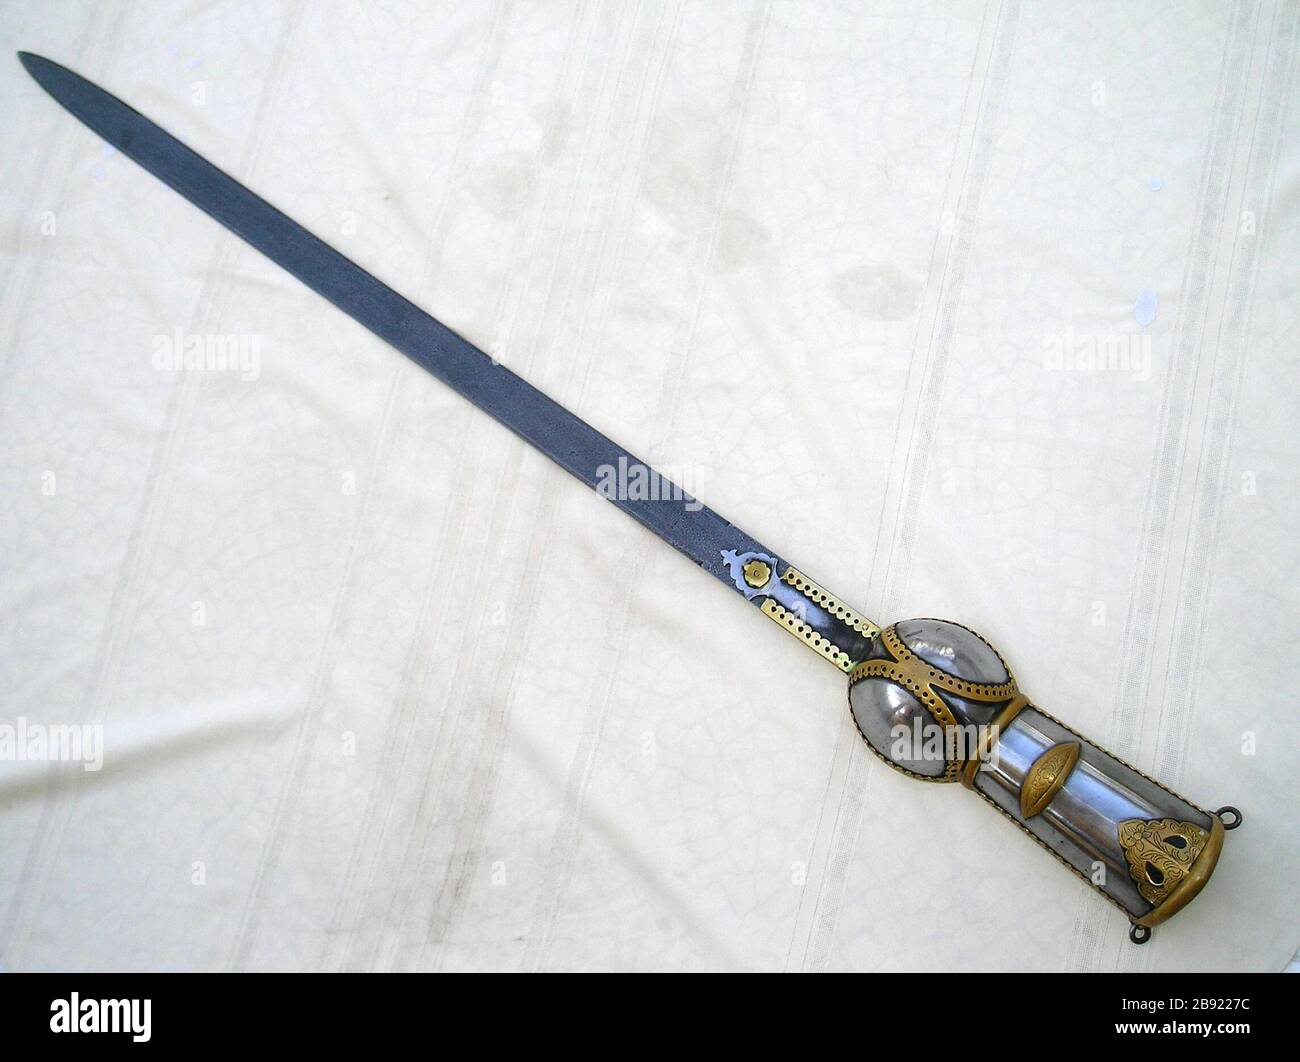 English: The new pictures of Pata. A very deadly weapon, mainly used as a  cavalry weapon. This one is from my personal collection. Restored but  largely in its original form. The blade